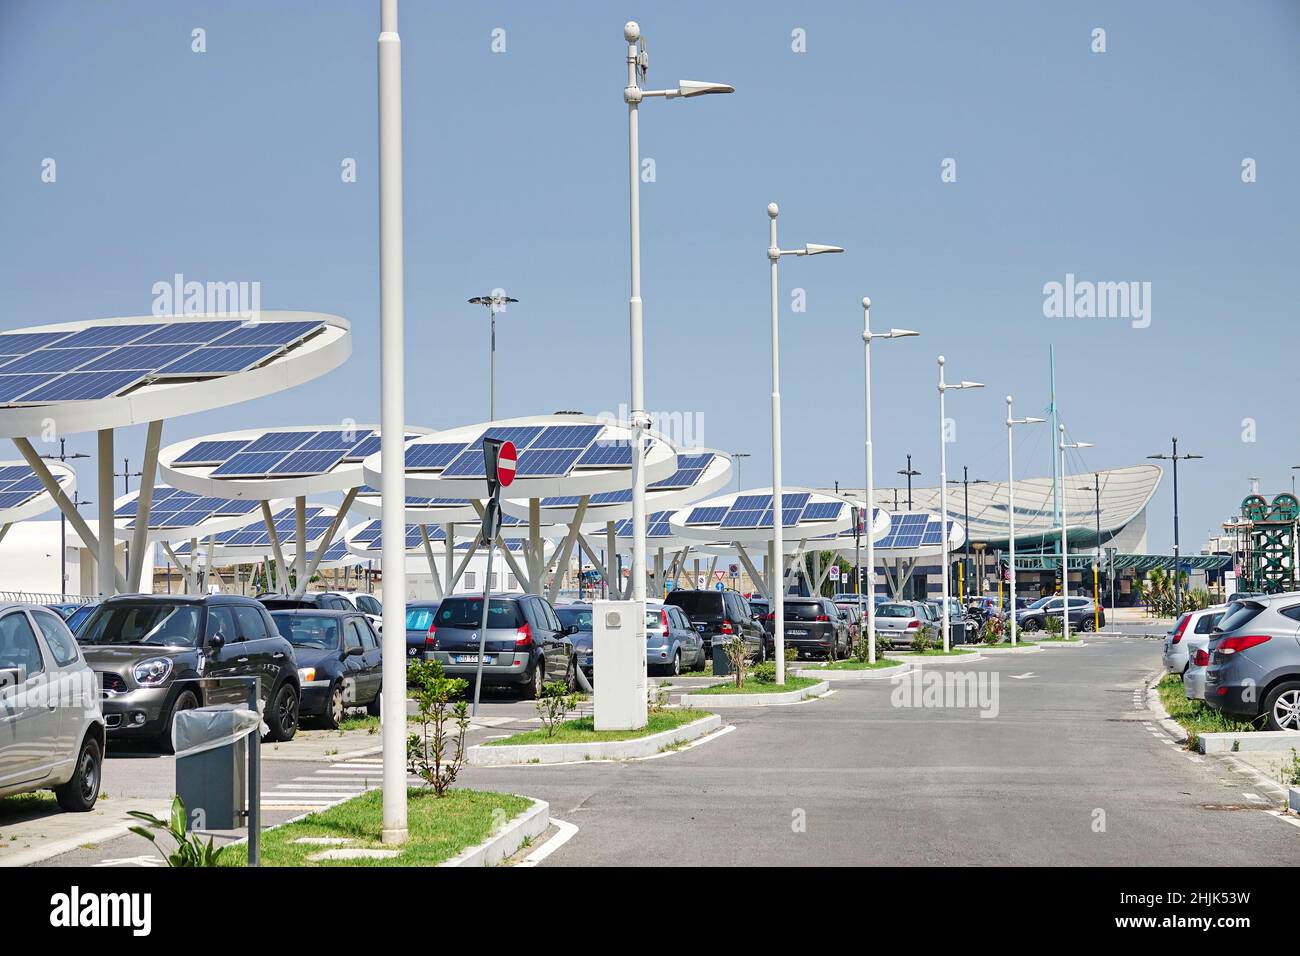 Solar panels in a car park. Companies are installing renewable energy sources to reduce their carbon footprint.  Reggio Calabria, Italy - July 2021 Stock Photo